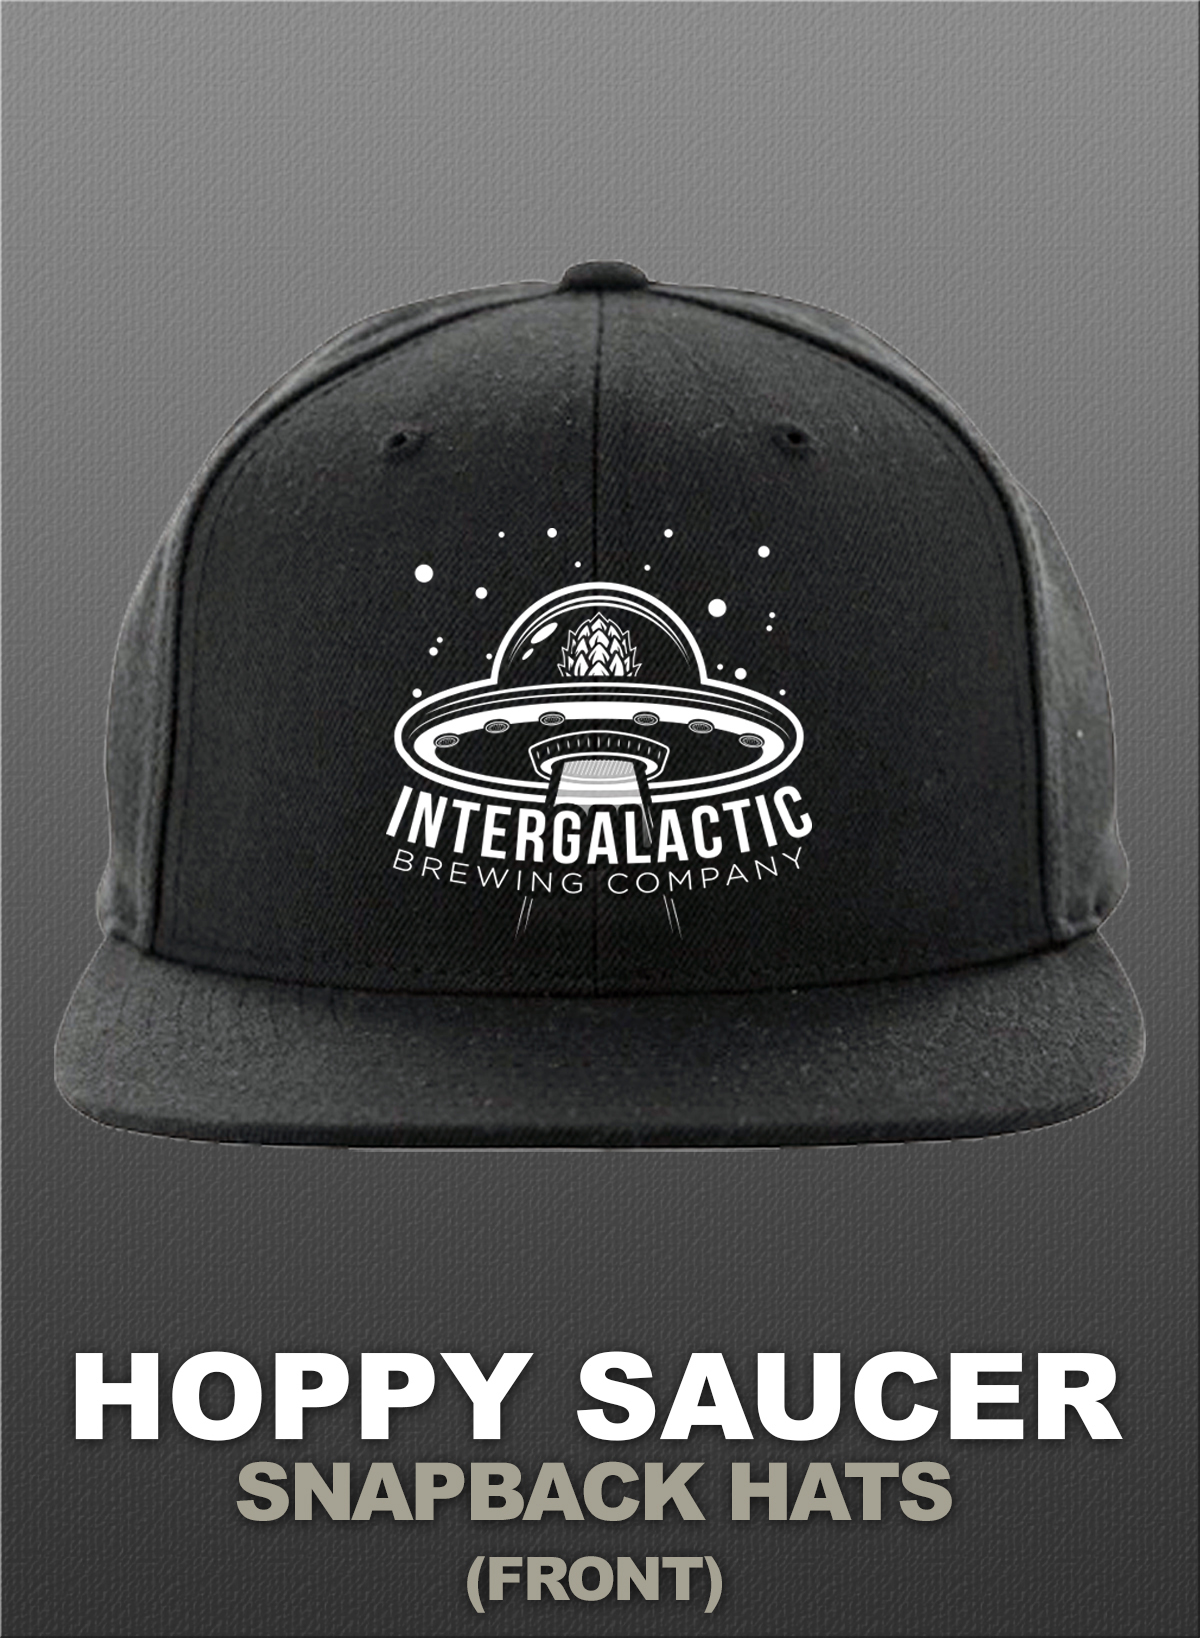 Intergalactic Brewing Company craft beer drink local brewery San Diego beer sci-fi science fiction flying saucer